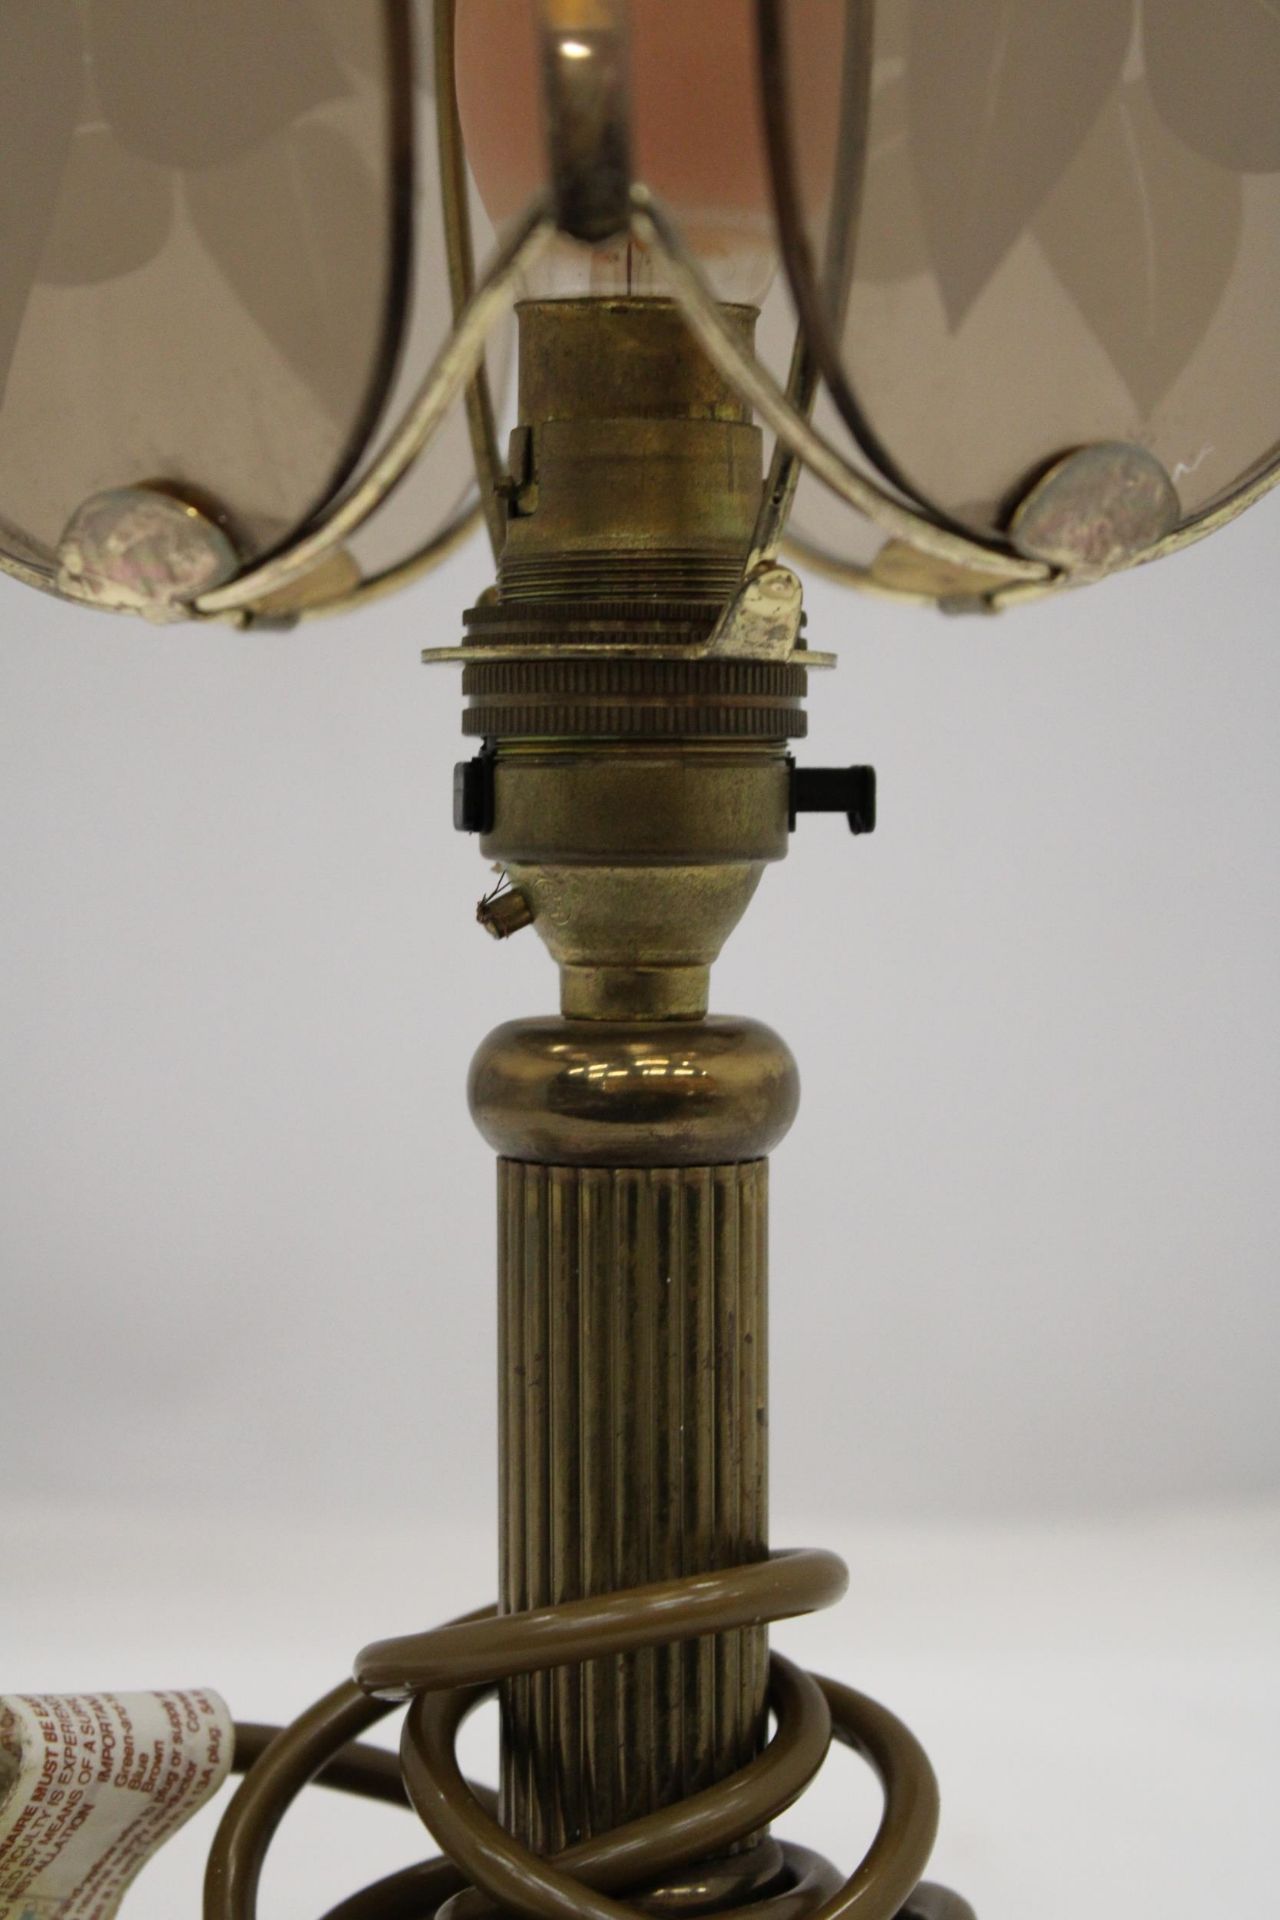 A VINTAGE STYLE, BRASS TABLE LAMP, WITH COLUMN BASE AND A GLASS SHADE, HEIGHT 36CM - Image 5 of 5